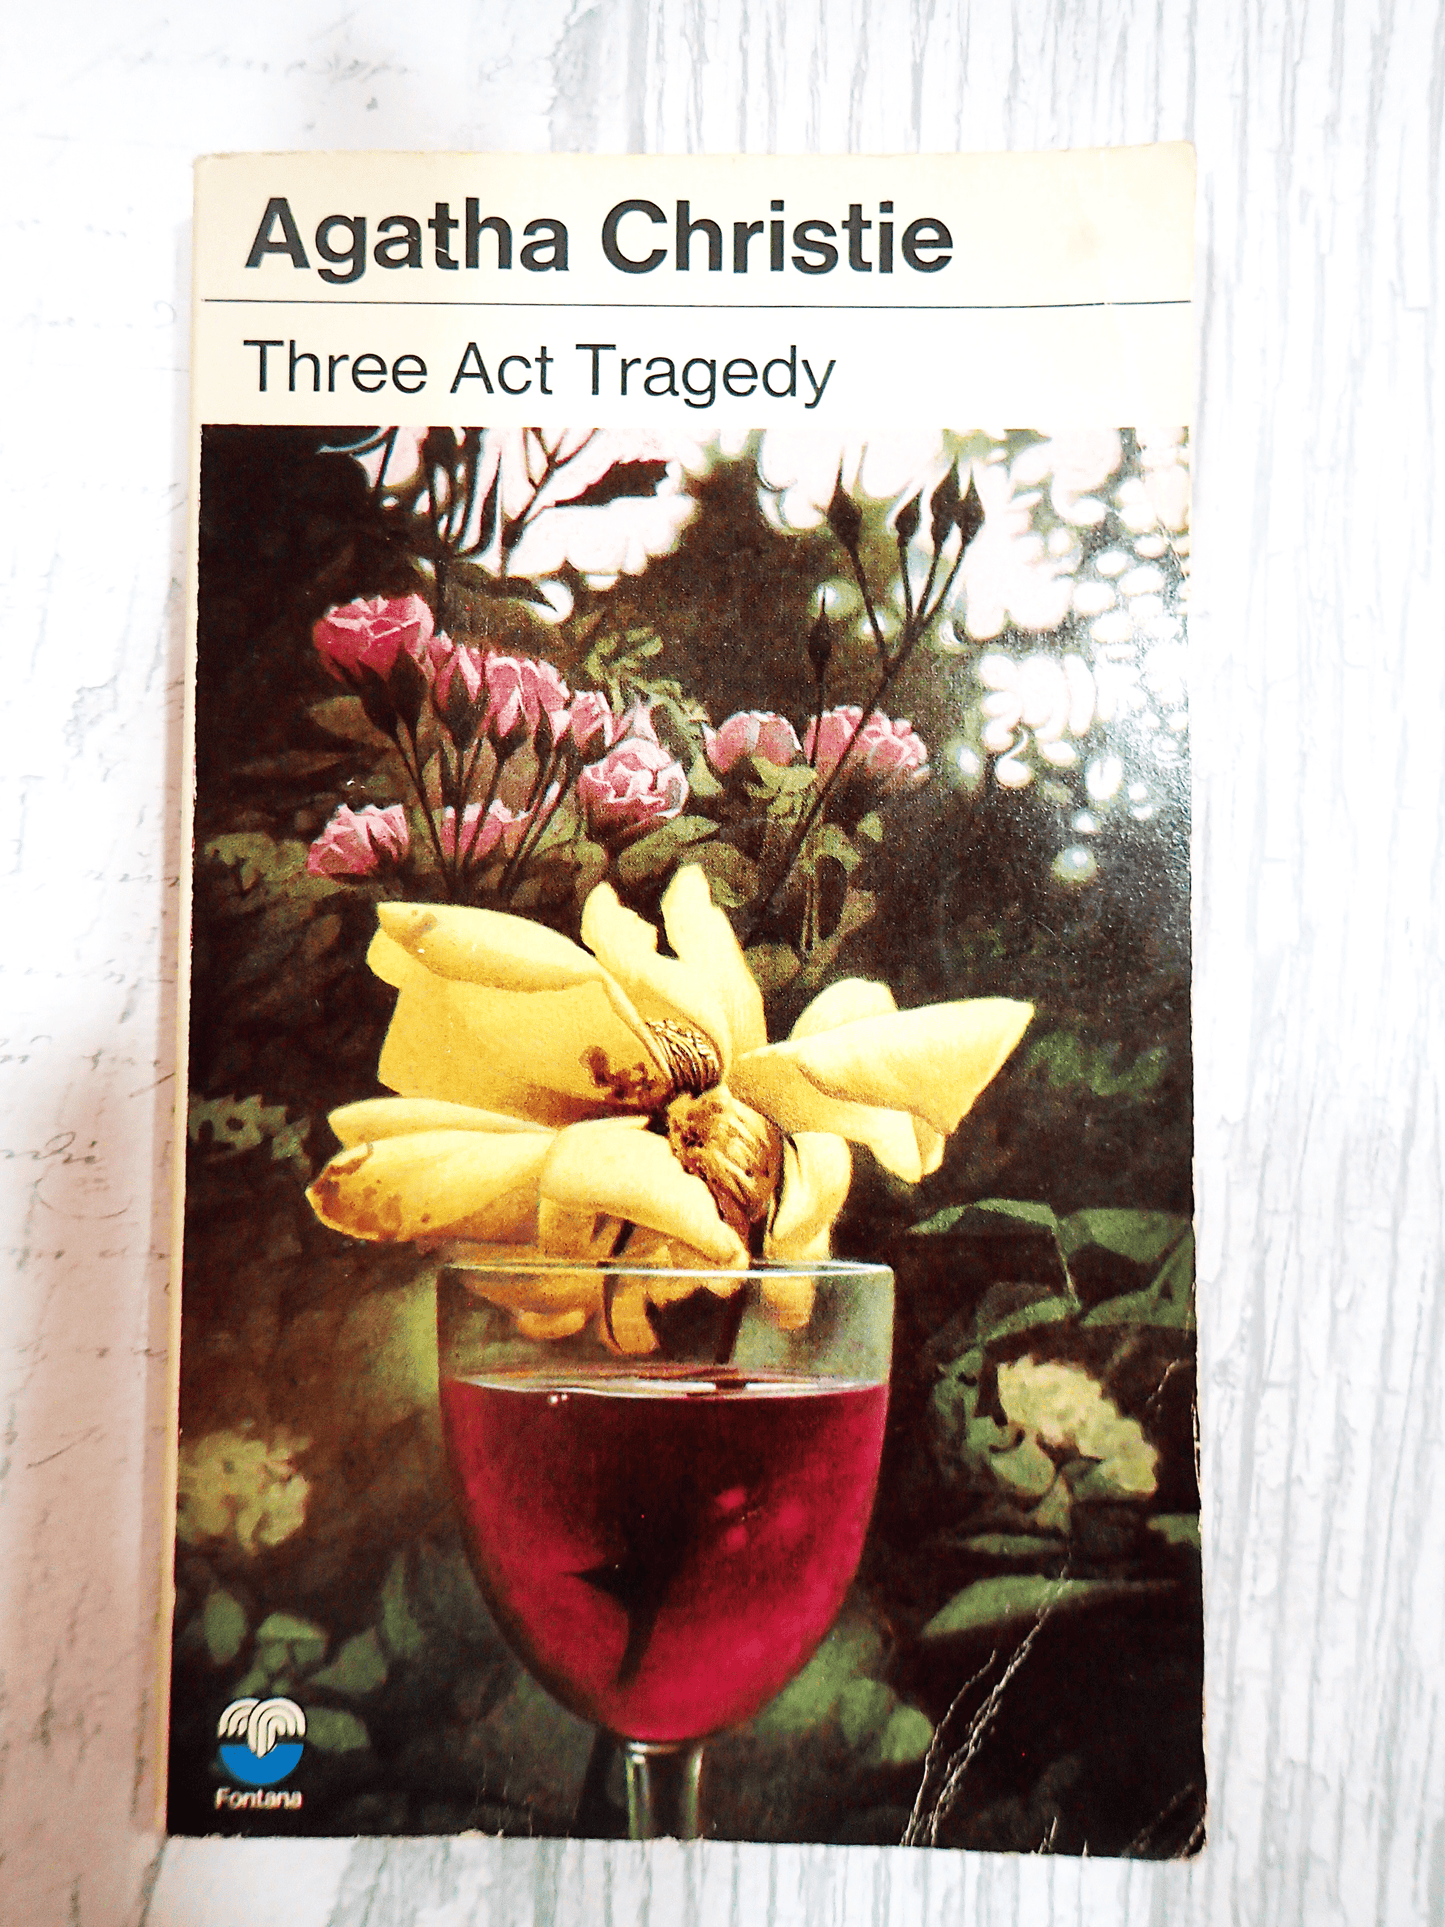 Front cover of Three Act Tragedy by Agatha Christie Vintage Pan Paperback Classic Crime book showing a flower with yellow petals in a glass of red wine against a light background